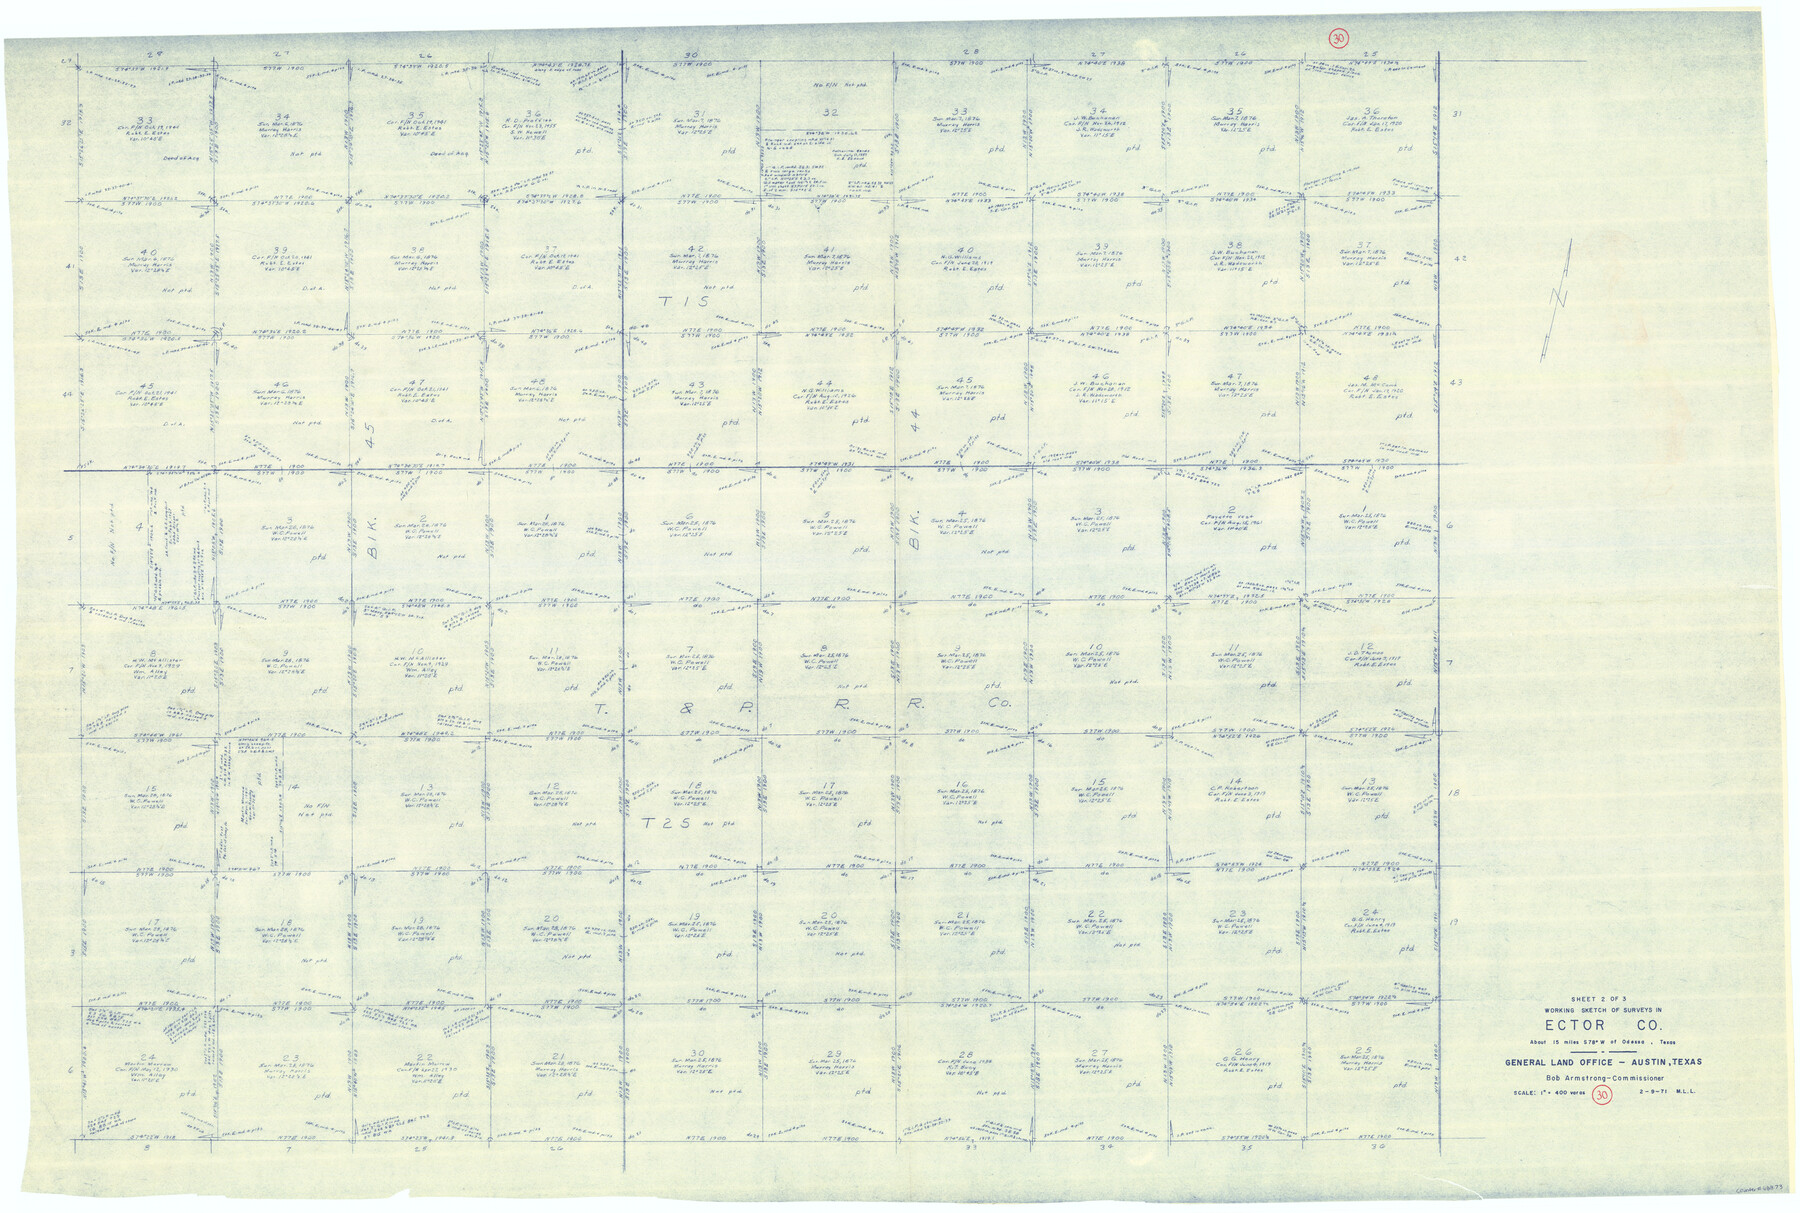 68873, Ector County Working Sketch 30, General Map Collection